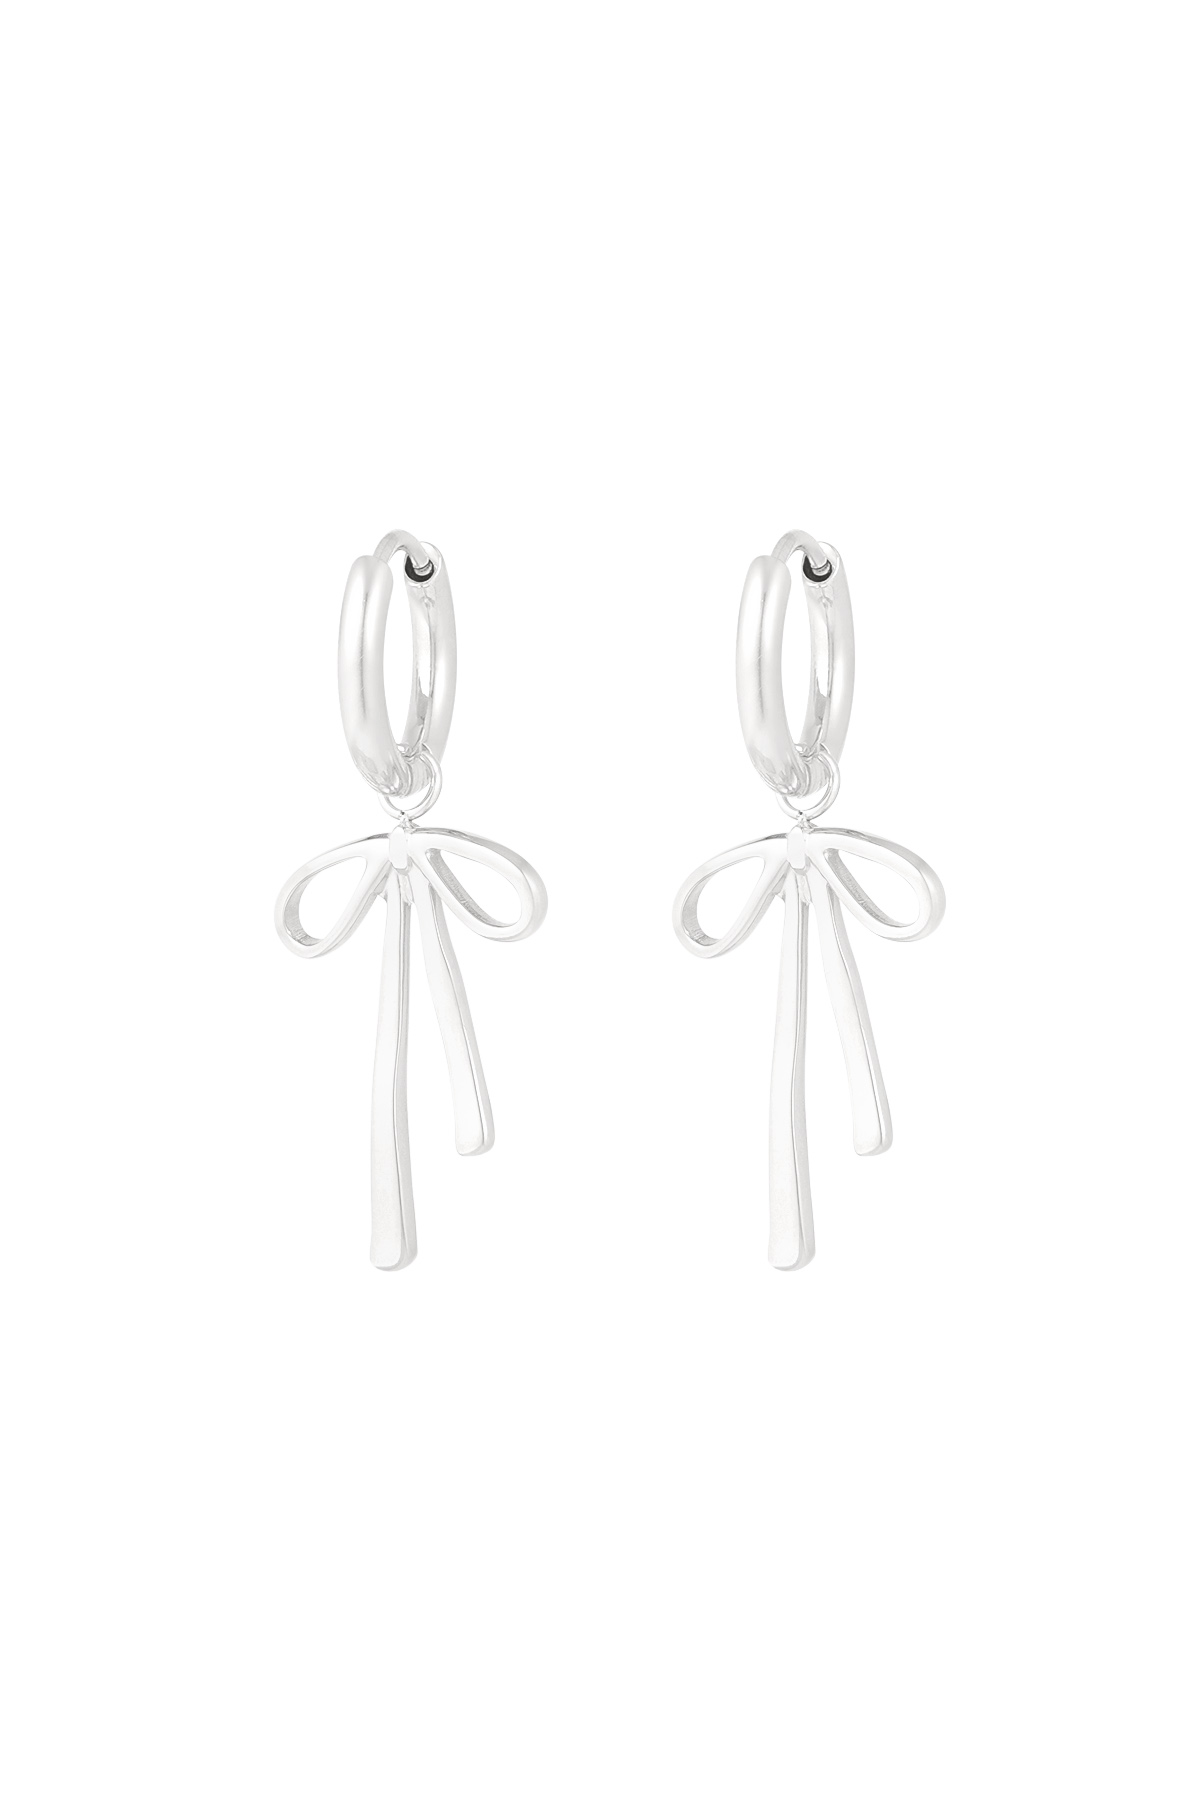 Hanging bow earrings - silver h5 